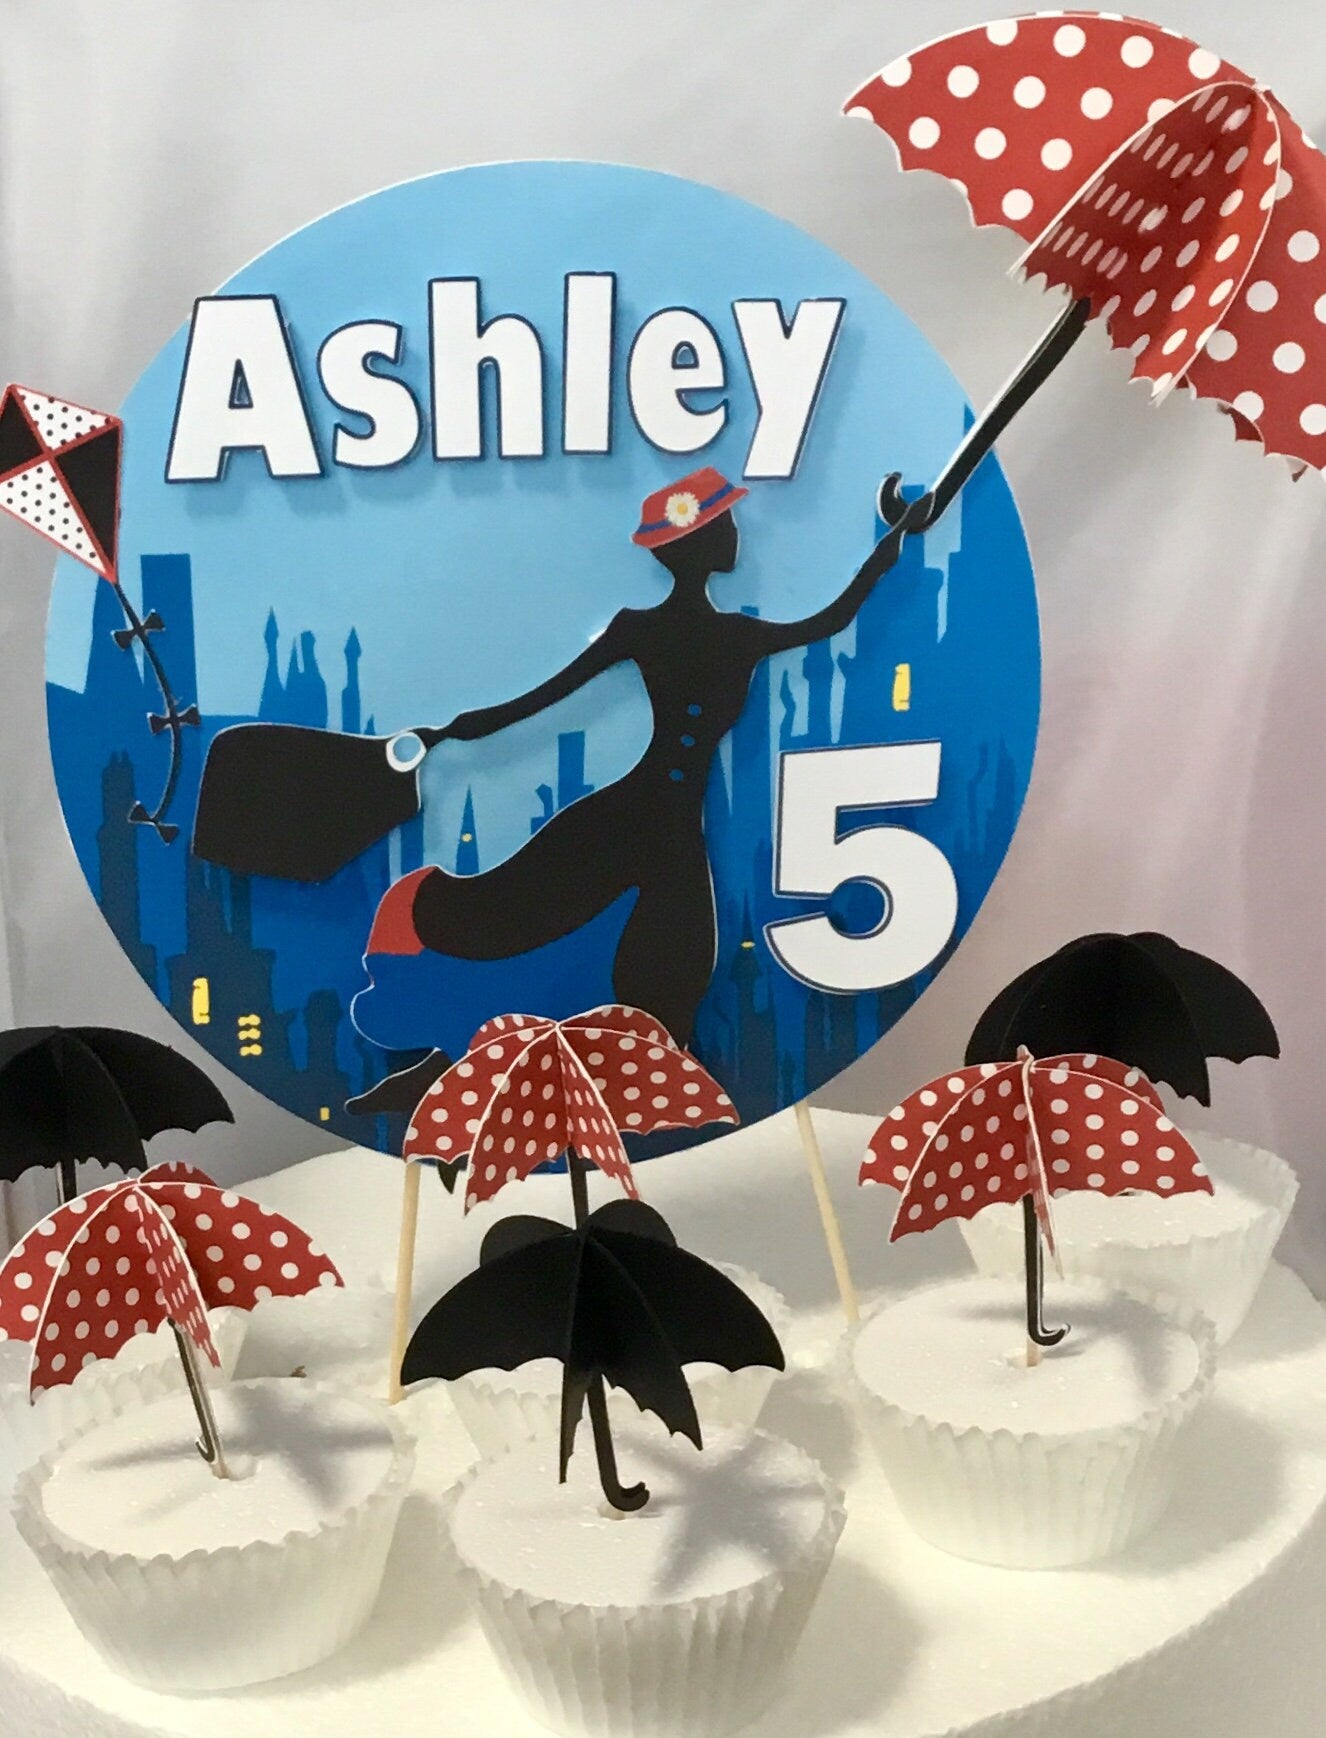 Mary Poppins Inspired Cupcake Toppers/ Baby shower cupcake toppers - Set of 12 cupcake toppers